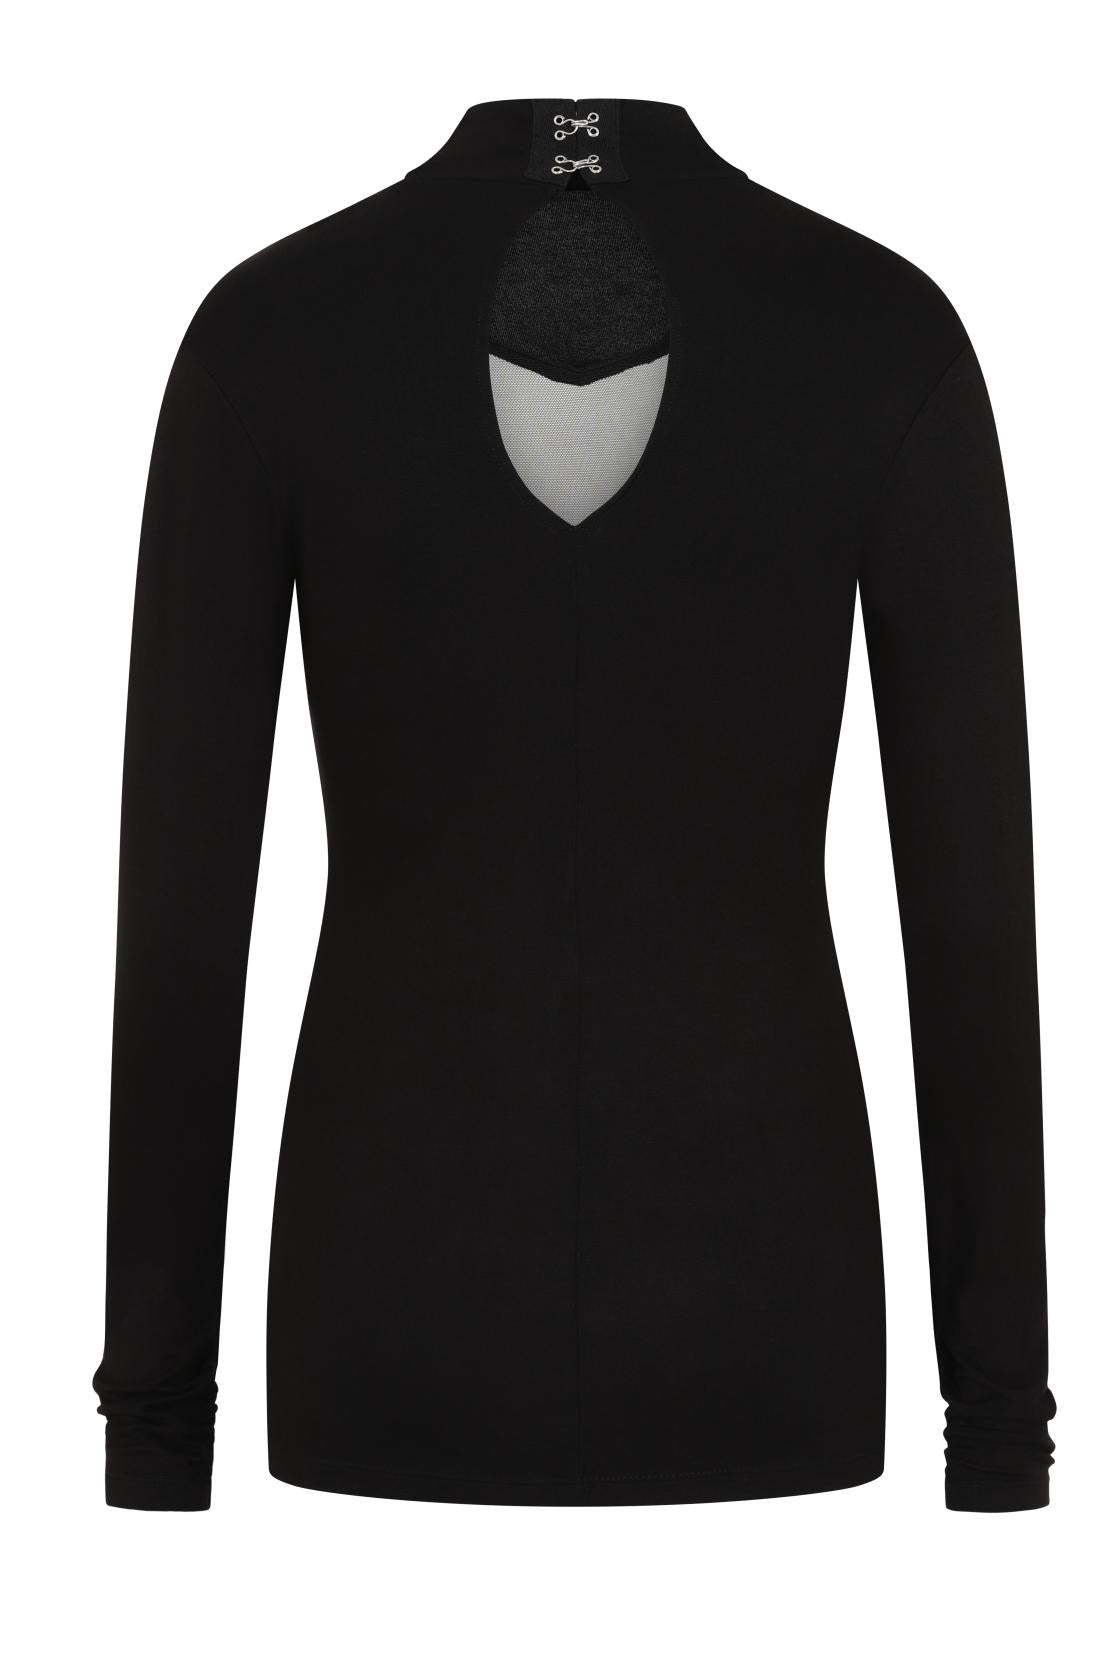 Necessary Evil Cybele Bat Panel Long Sleeve Top - Kate's Clothing